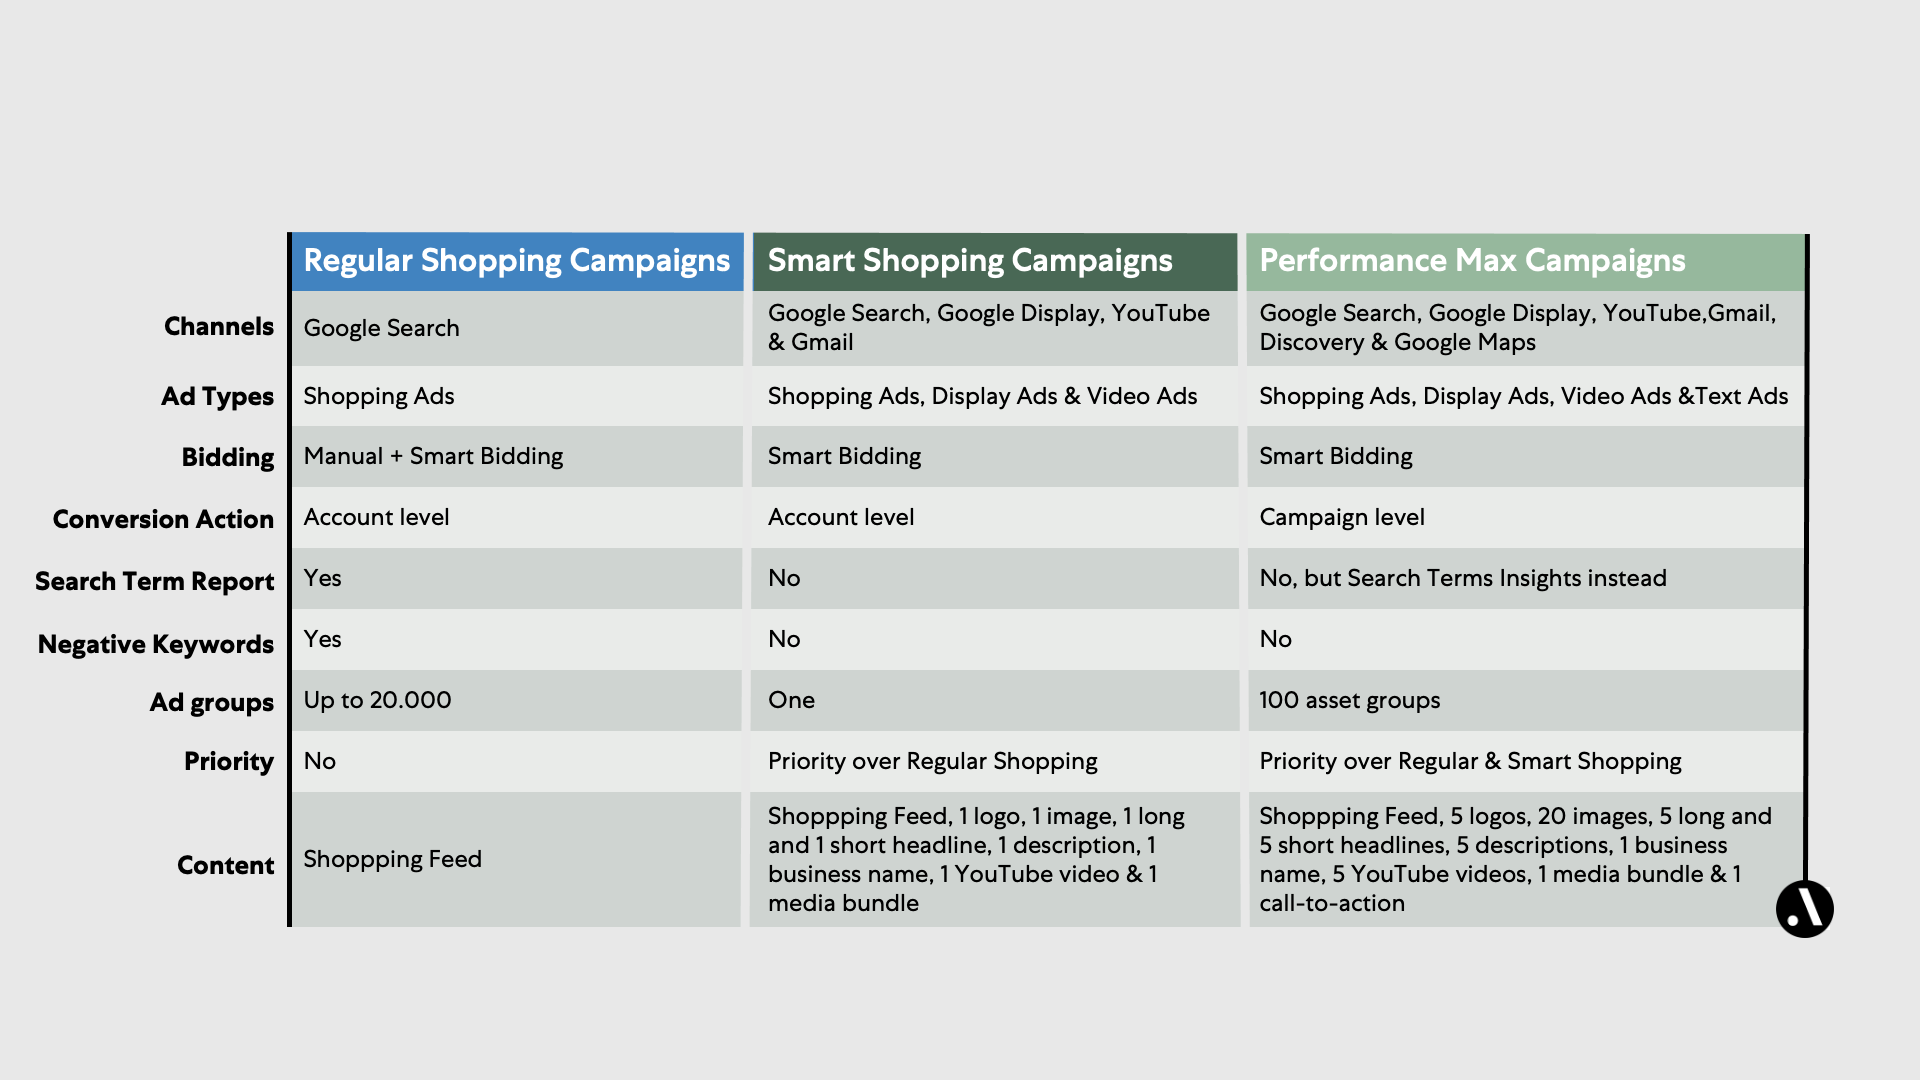 Performance Max Campaigns vs Smart Shopping Campaigns